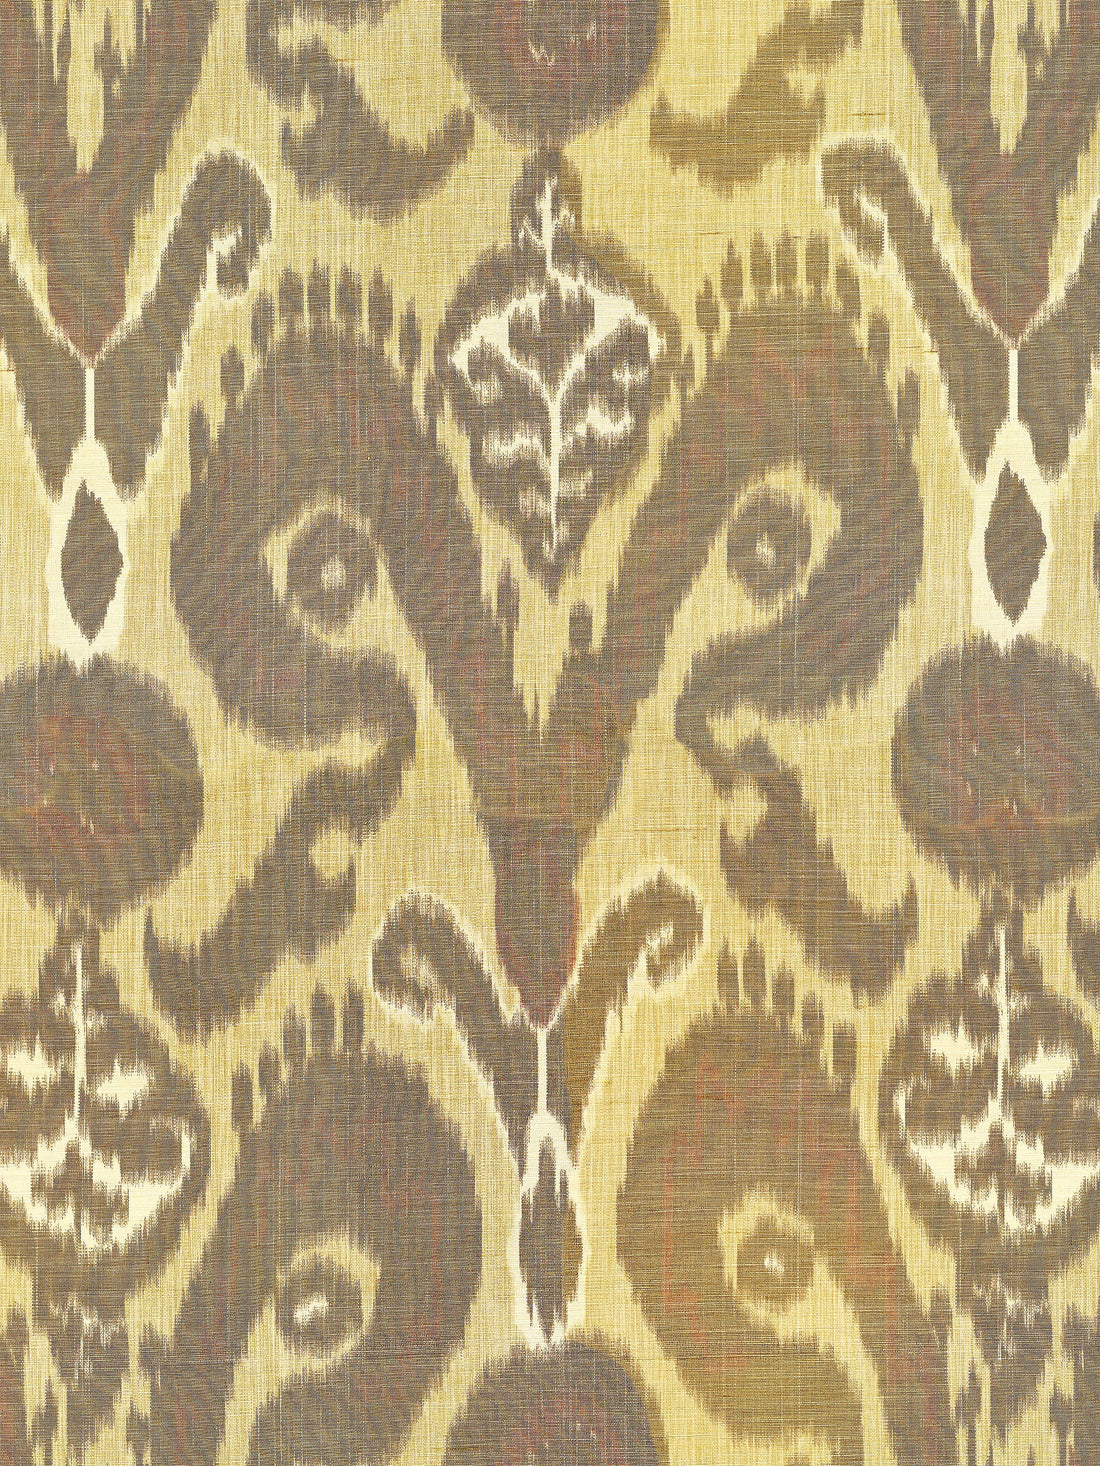 Bukhara Silk Ikat fabric in spice color - pattern number SC 000227097 - by Scalamandre in the Scalamandre Fabrics Book 1 collection